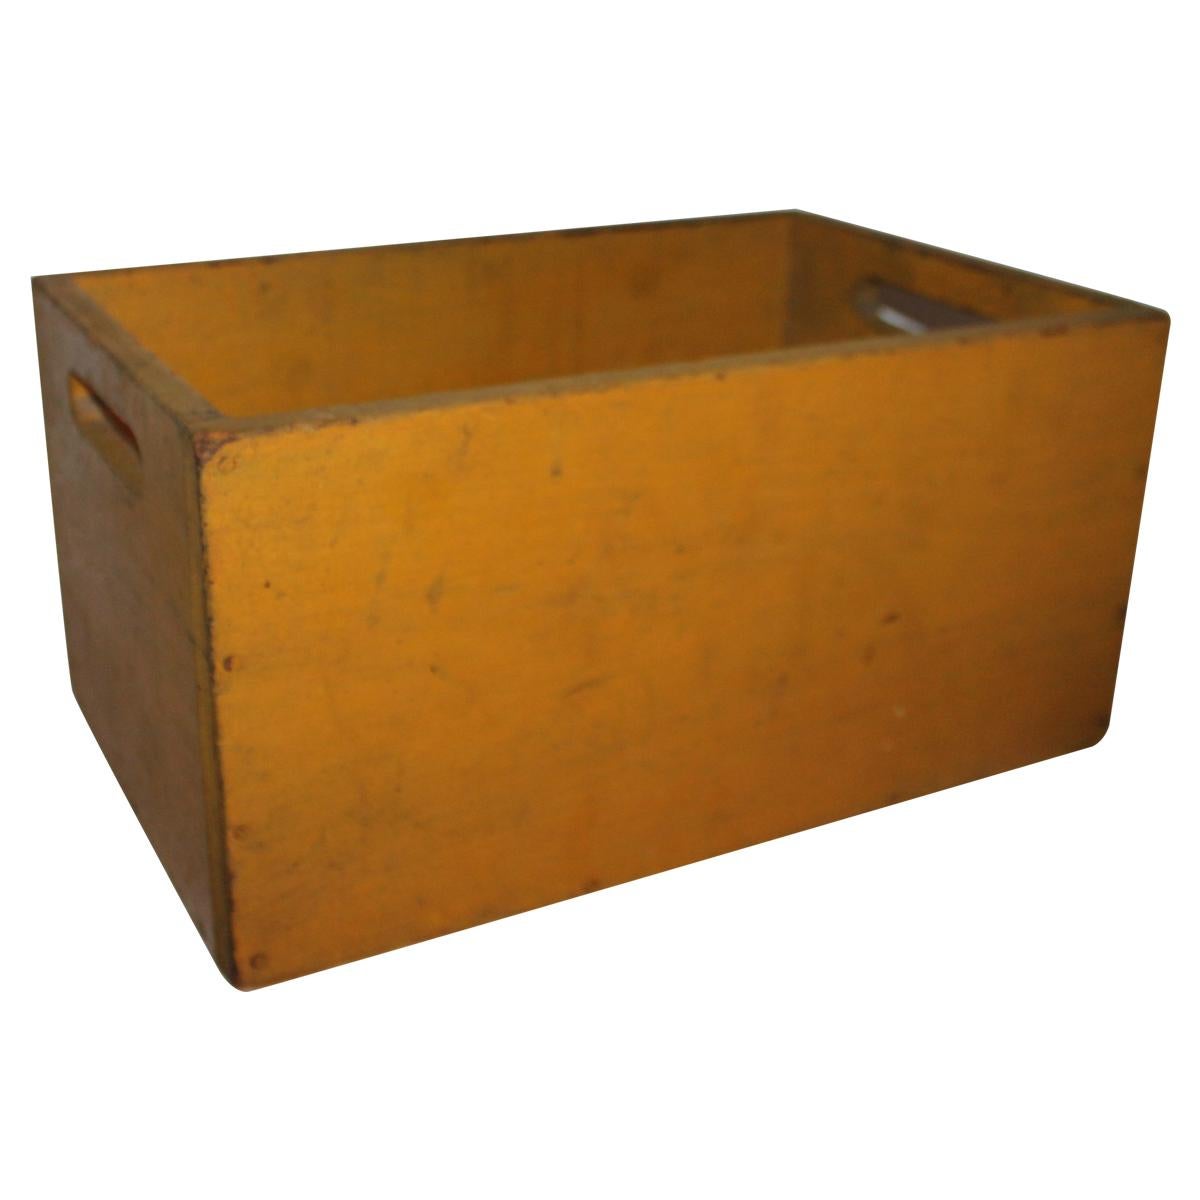 19th Century Original Chrome Yellow Painted Handled Box For Sale